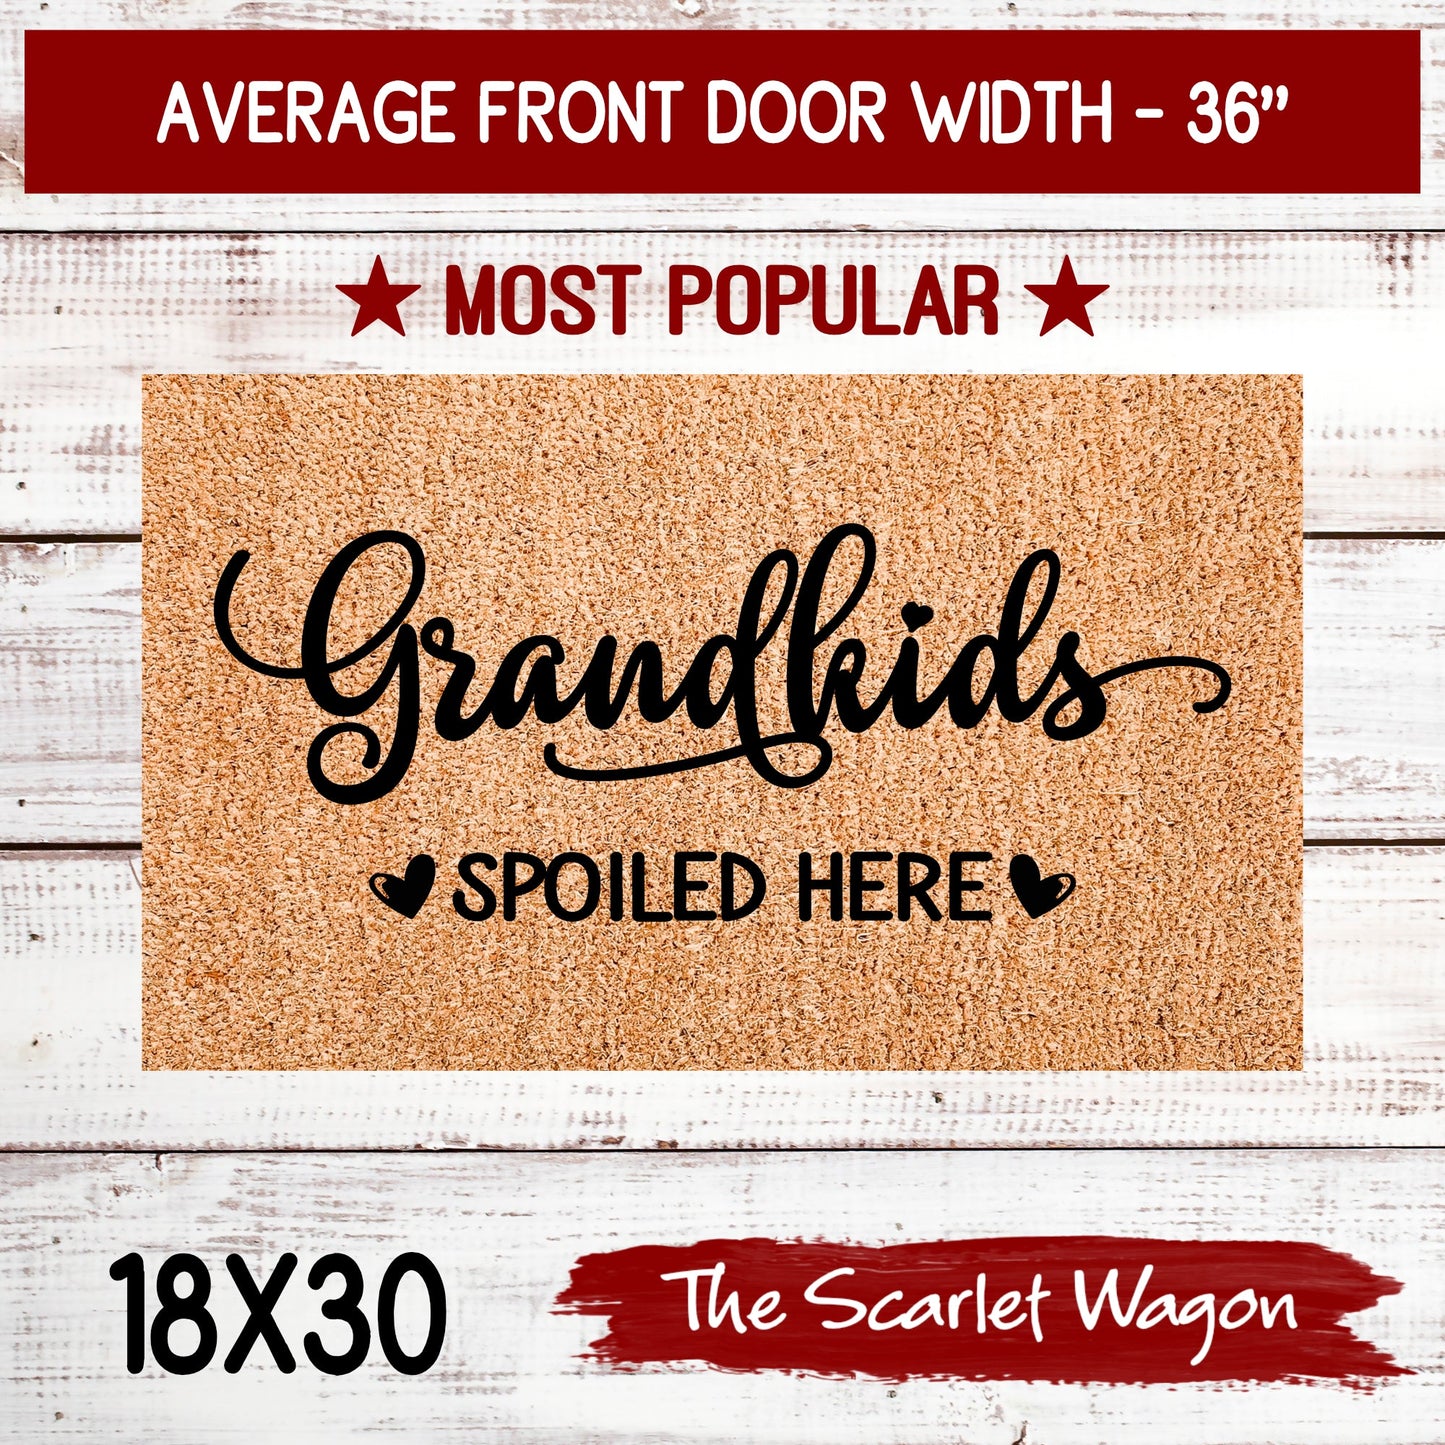 Grandkids Spoiled Here Door Mats teelaunch 18x30 Inches (Free Shipping) 